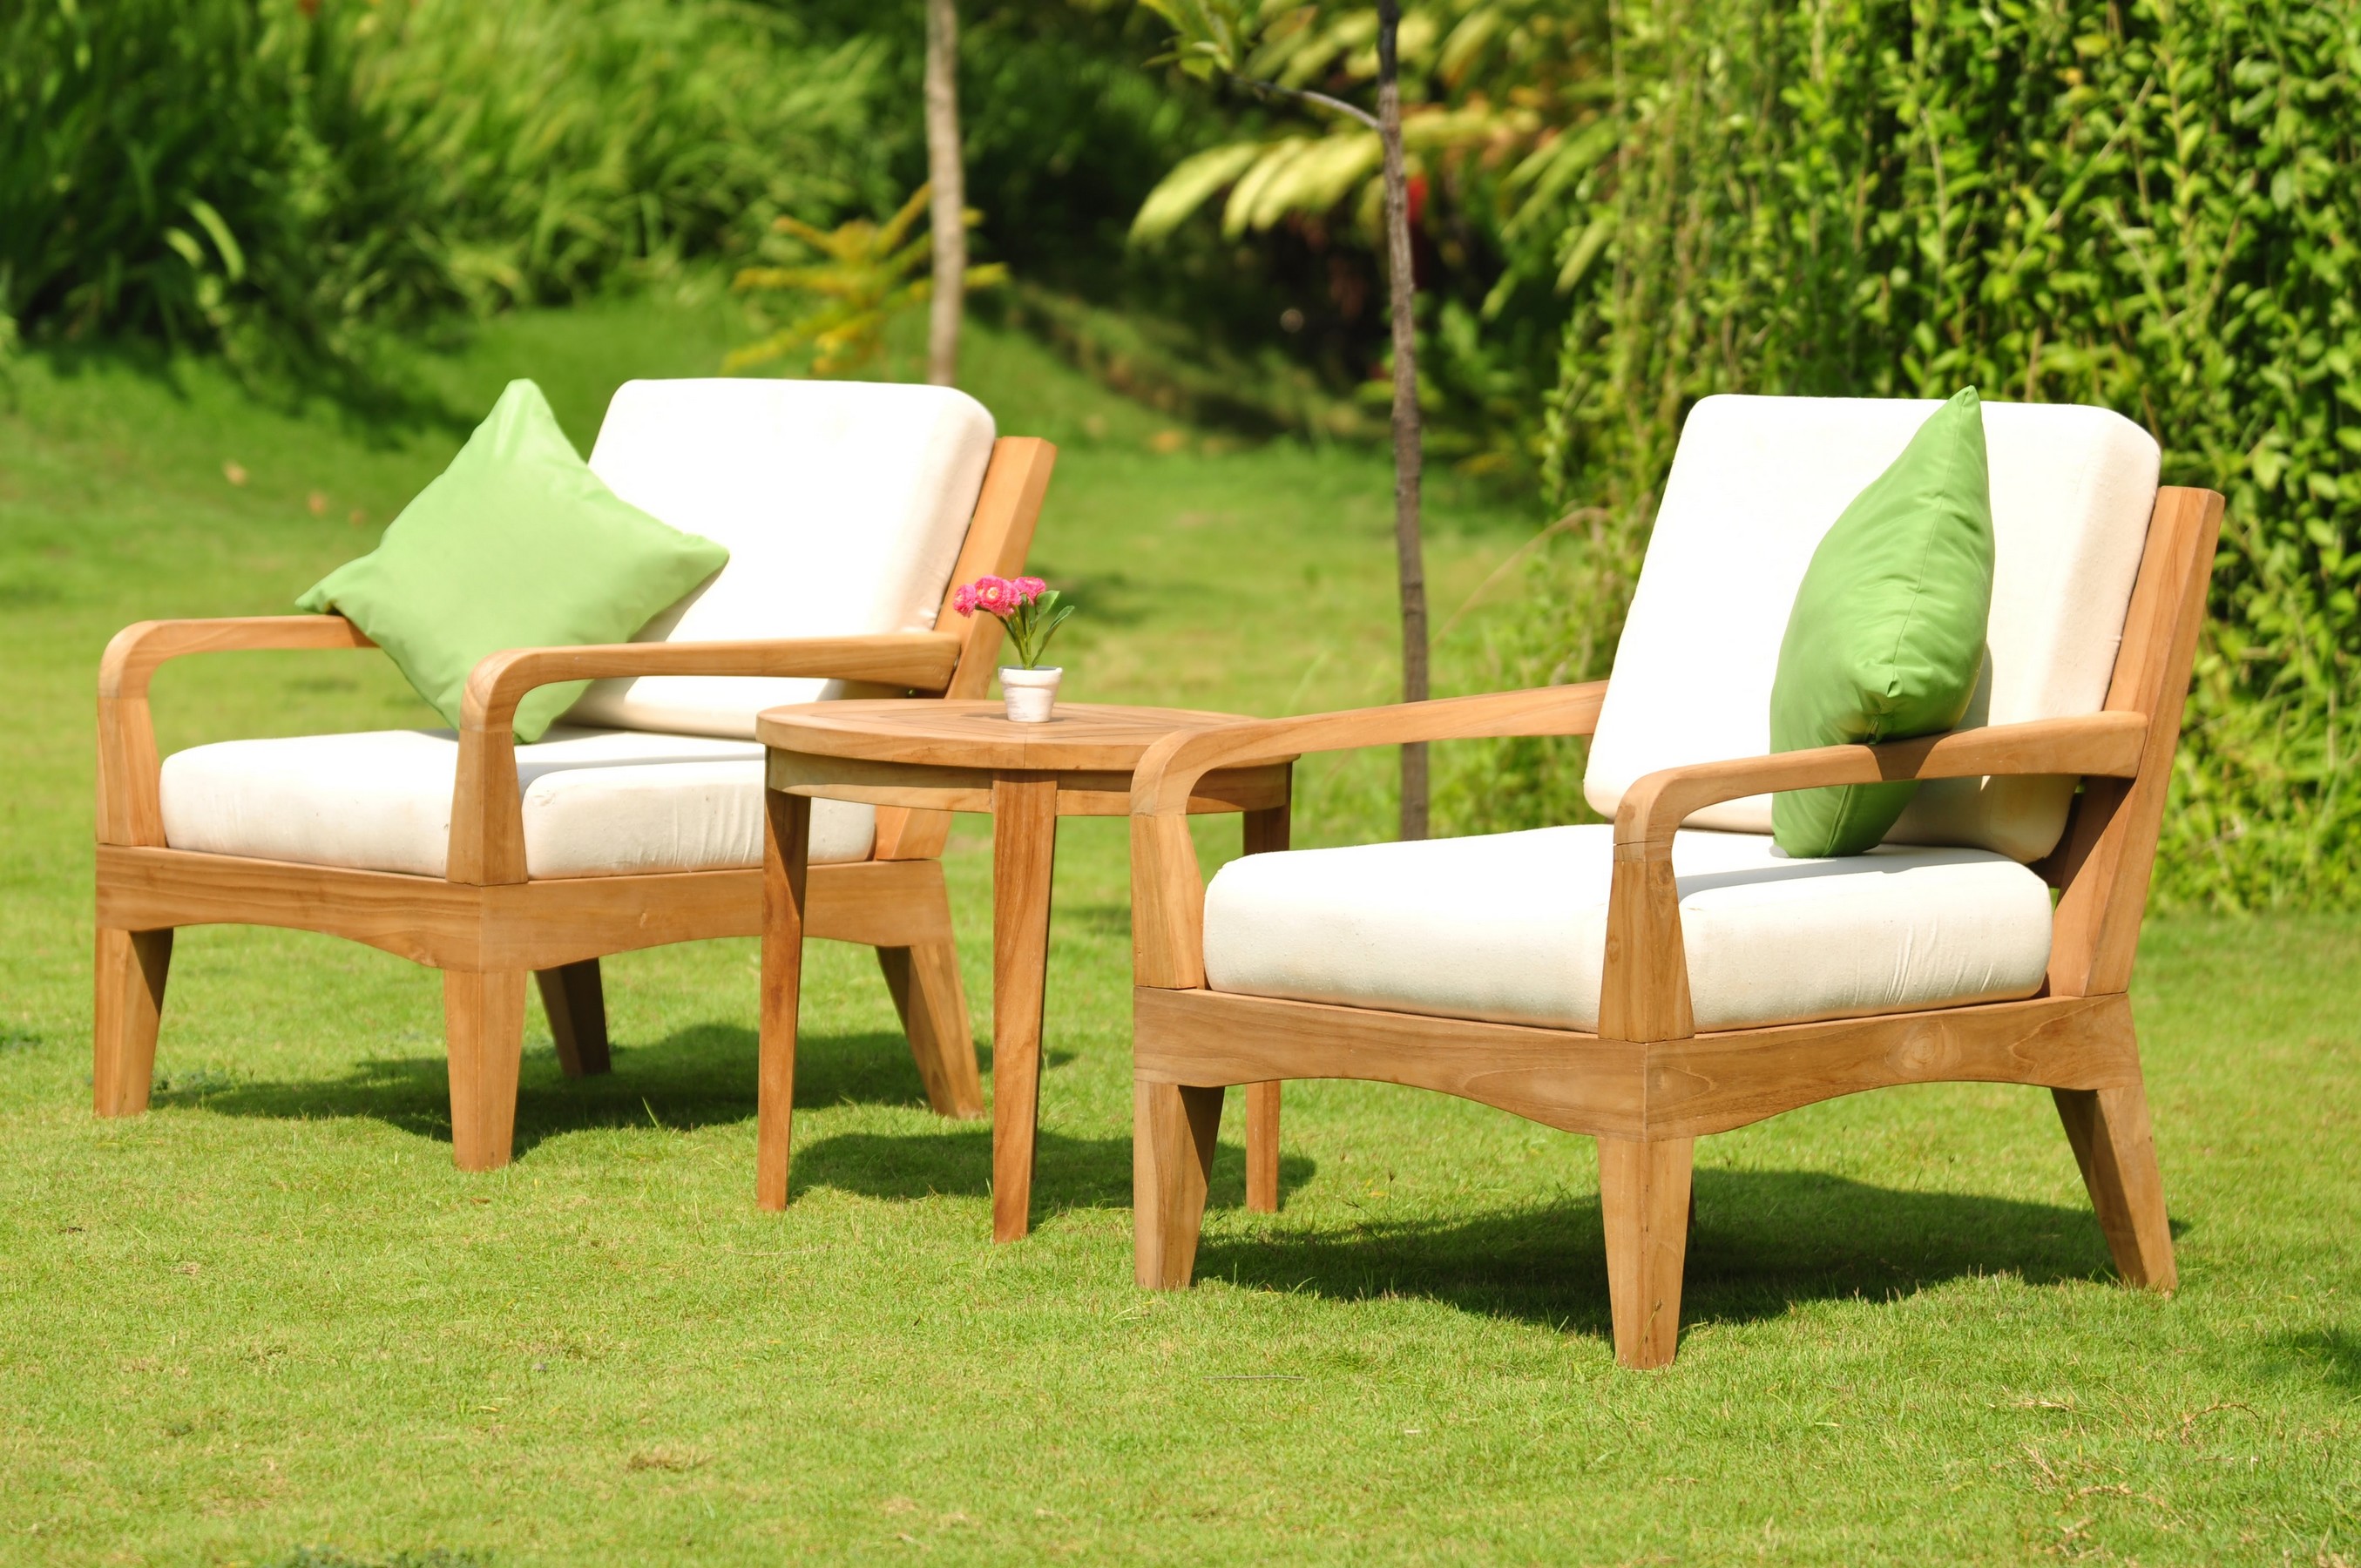 WholesaleTeak Outdoor Patio Grade-A Teak Wood 3 Piece Teak Sofa Lounge Chair Set - 2 Lounge Chairs And 1 Round End Table - Furniture only - Noida COLLECTION #WMSSNO3 - image 1 of 2